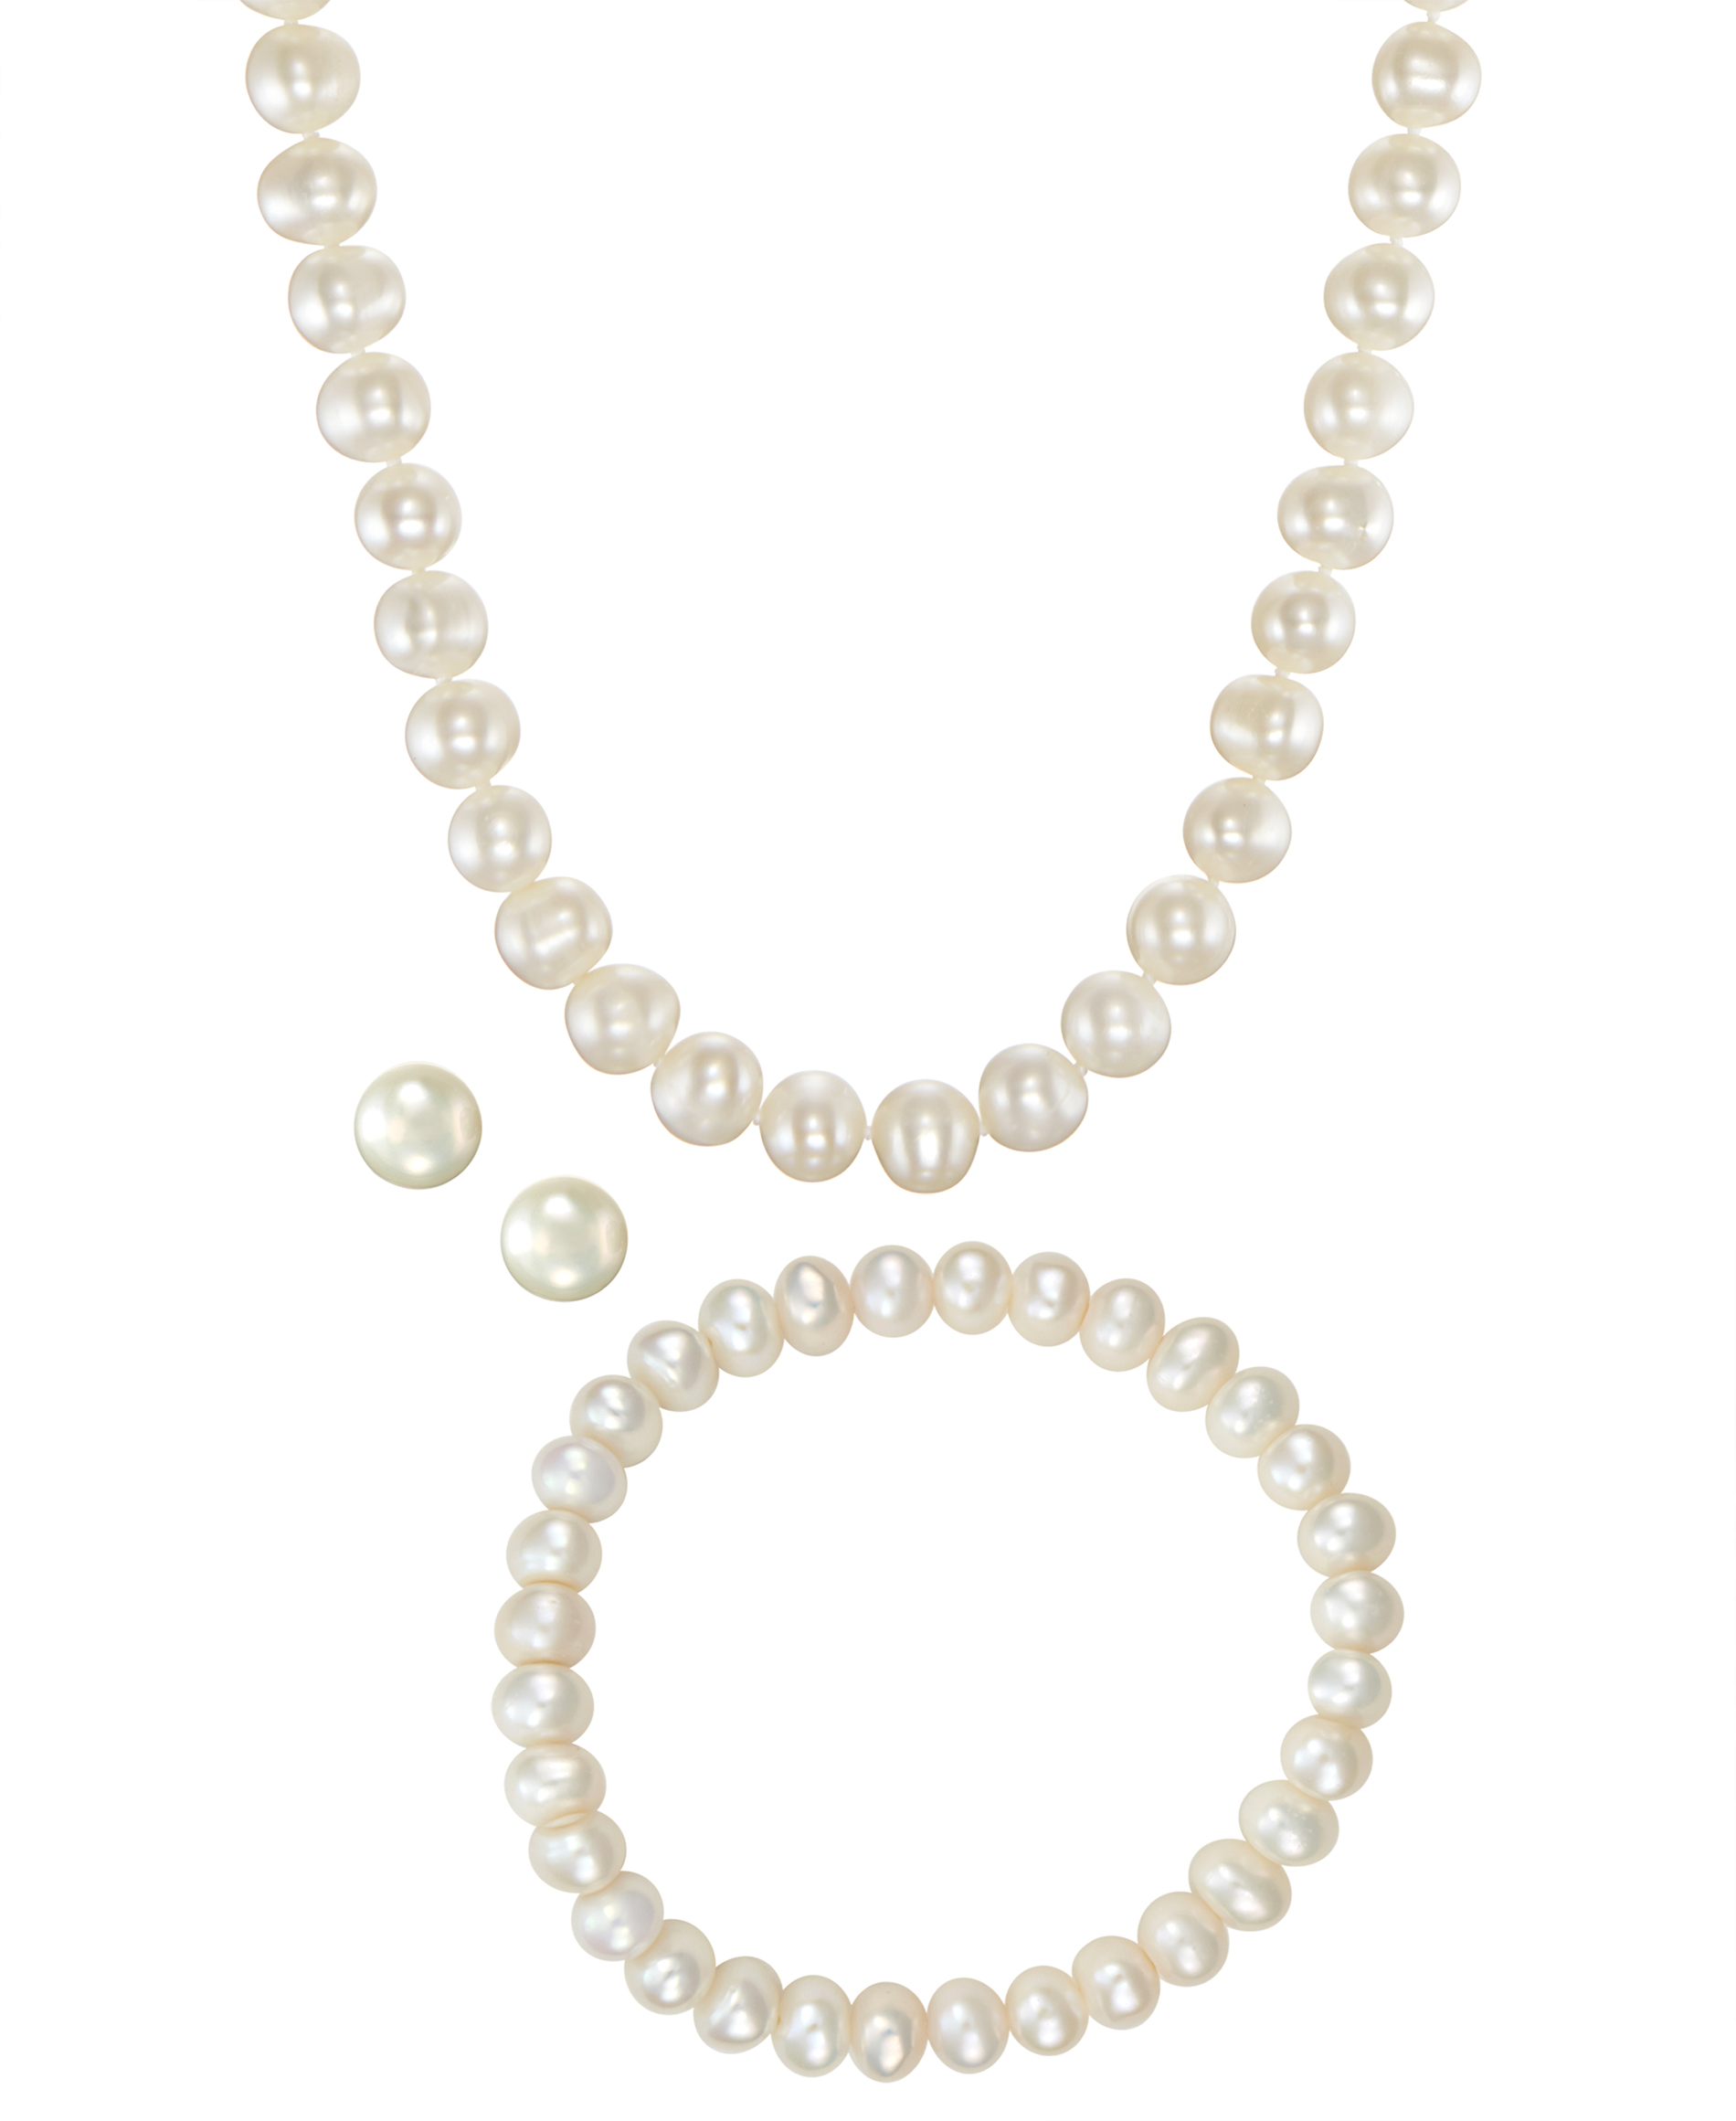 Cultured Freshwater (7-8mm) Pearl Necklace, Bracelet & Earring 3 pc Set, Crafted in Sterling Silver.